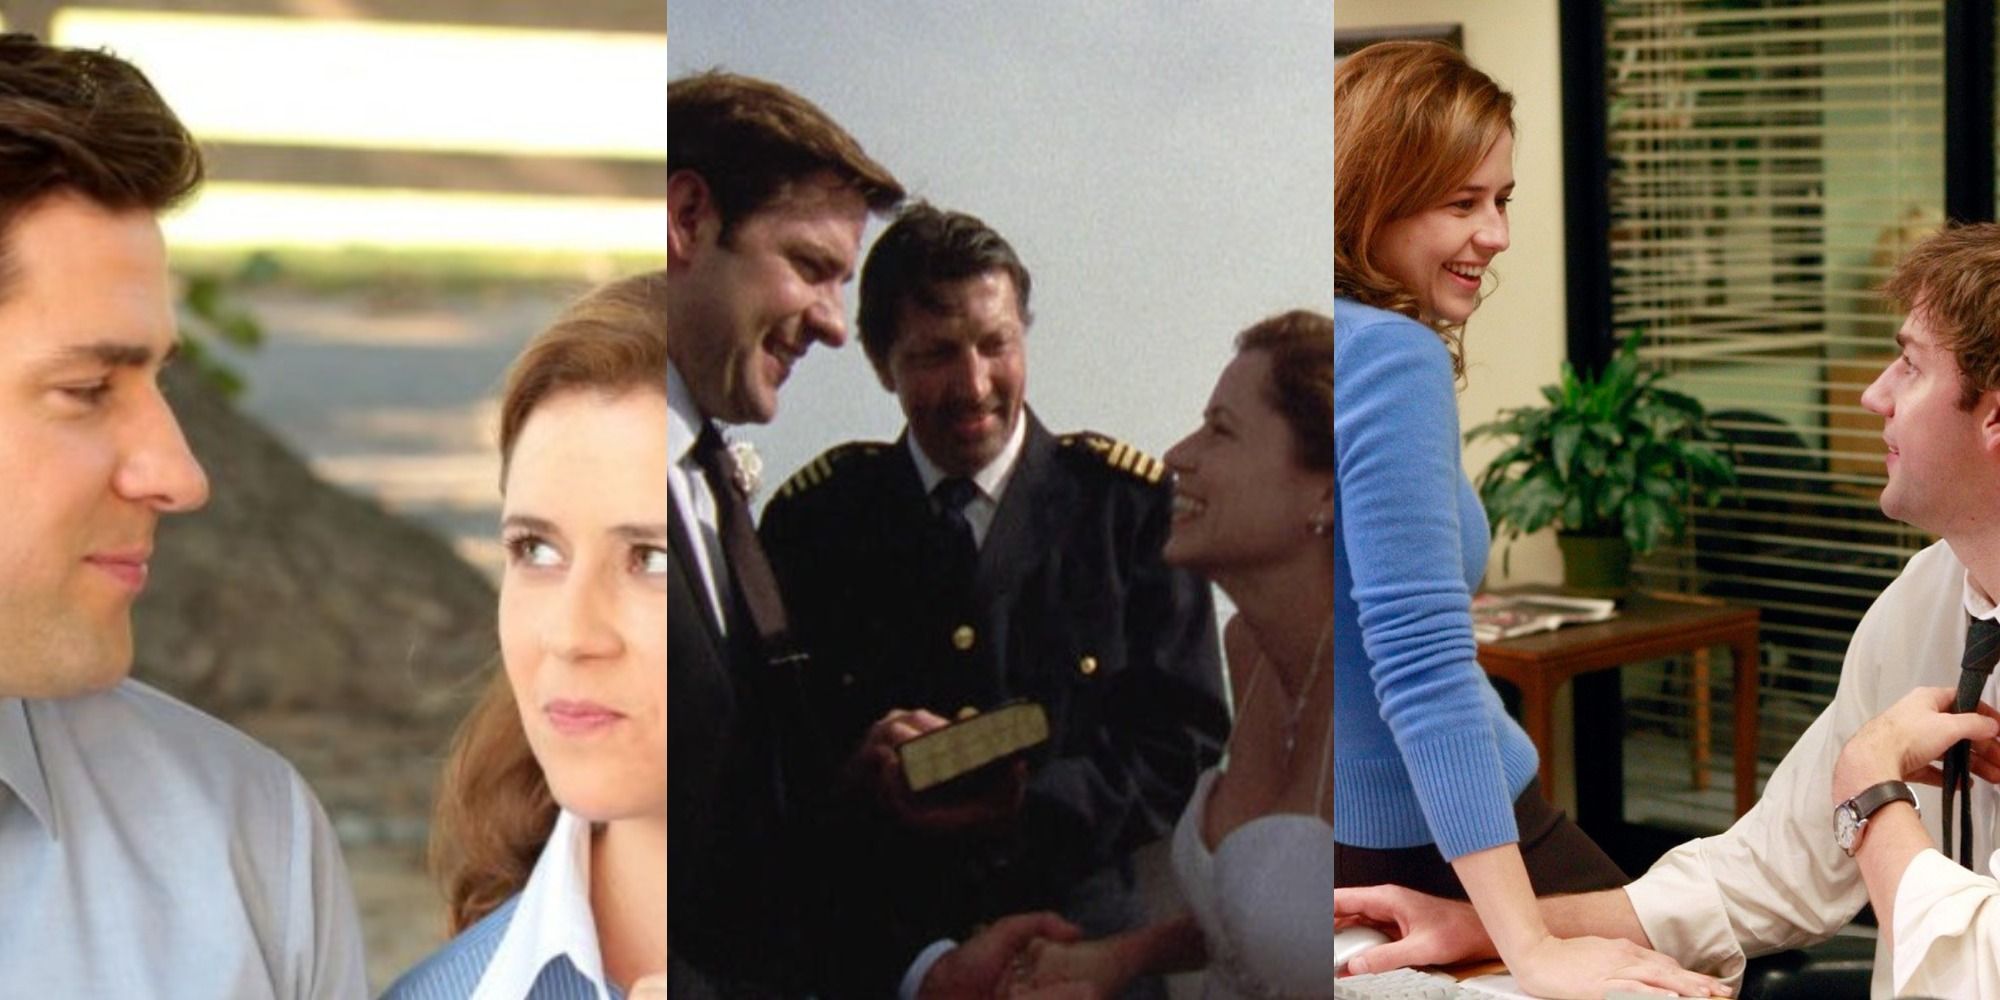 Triple image of Jim and Pam from the Office